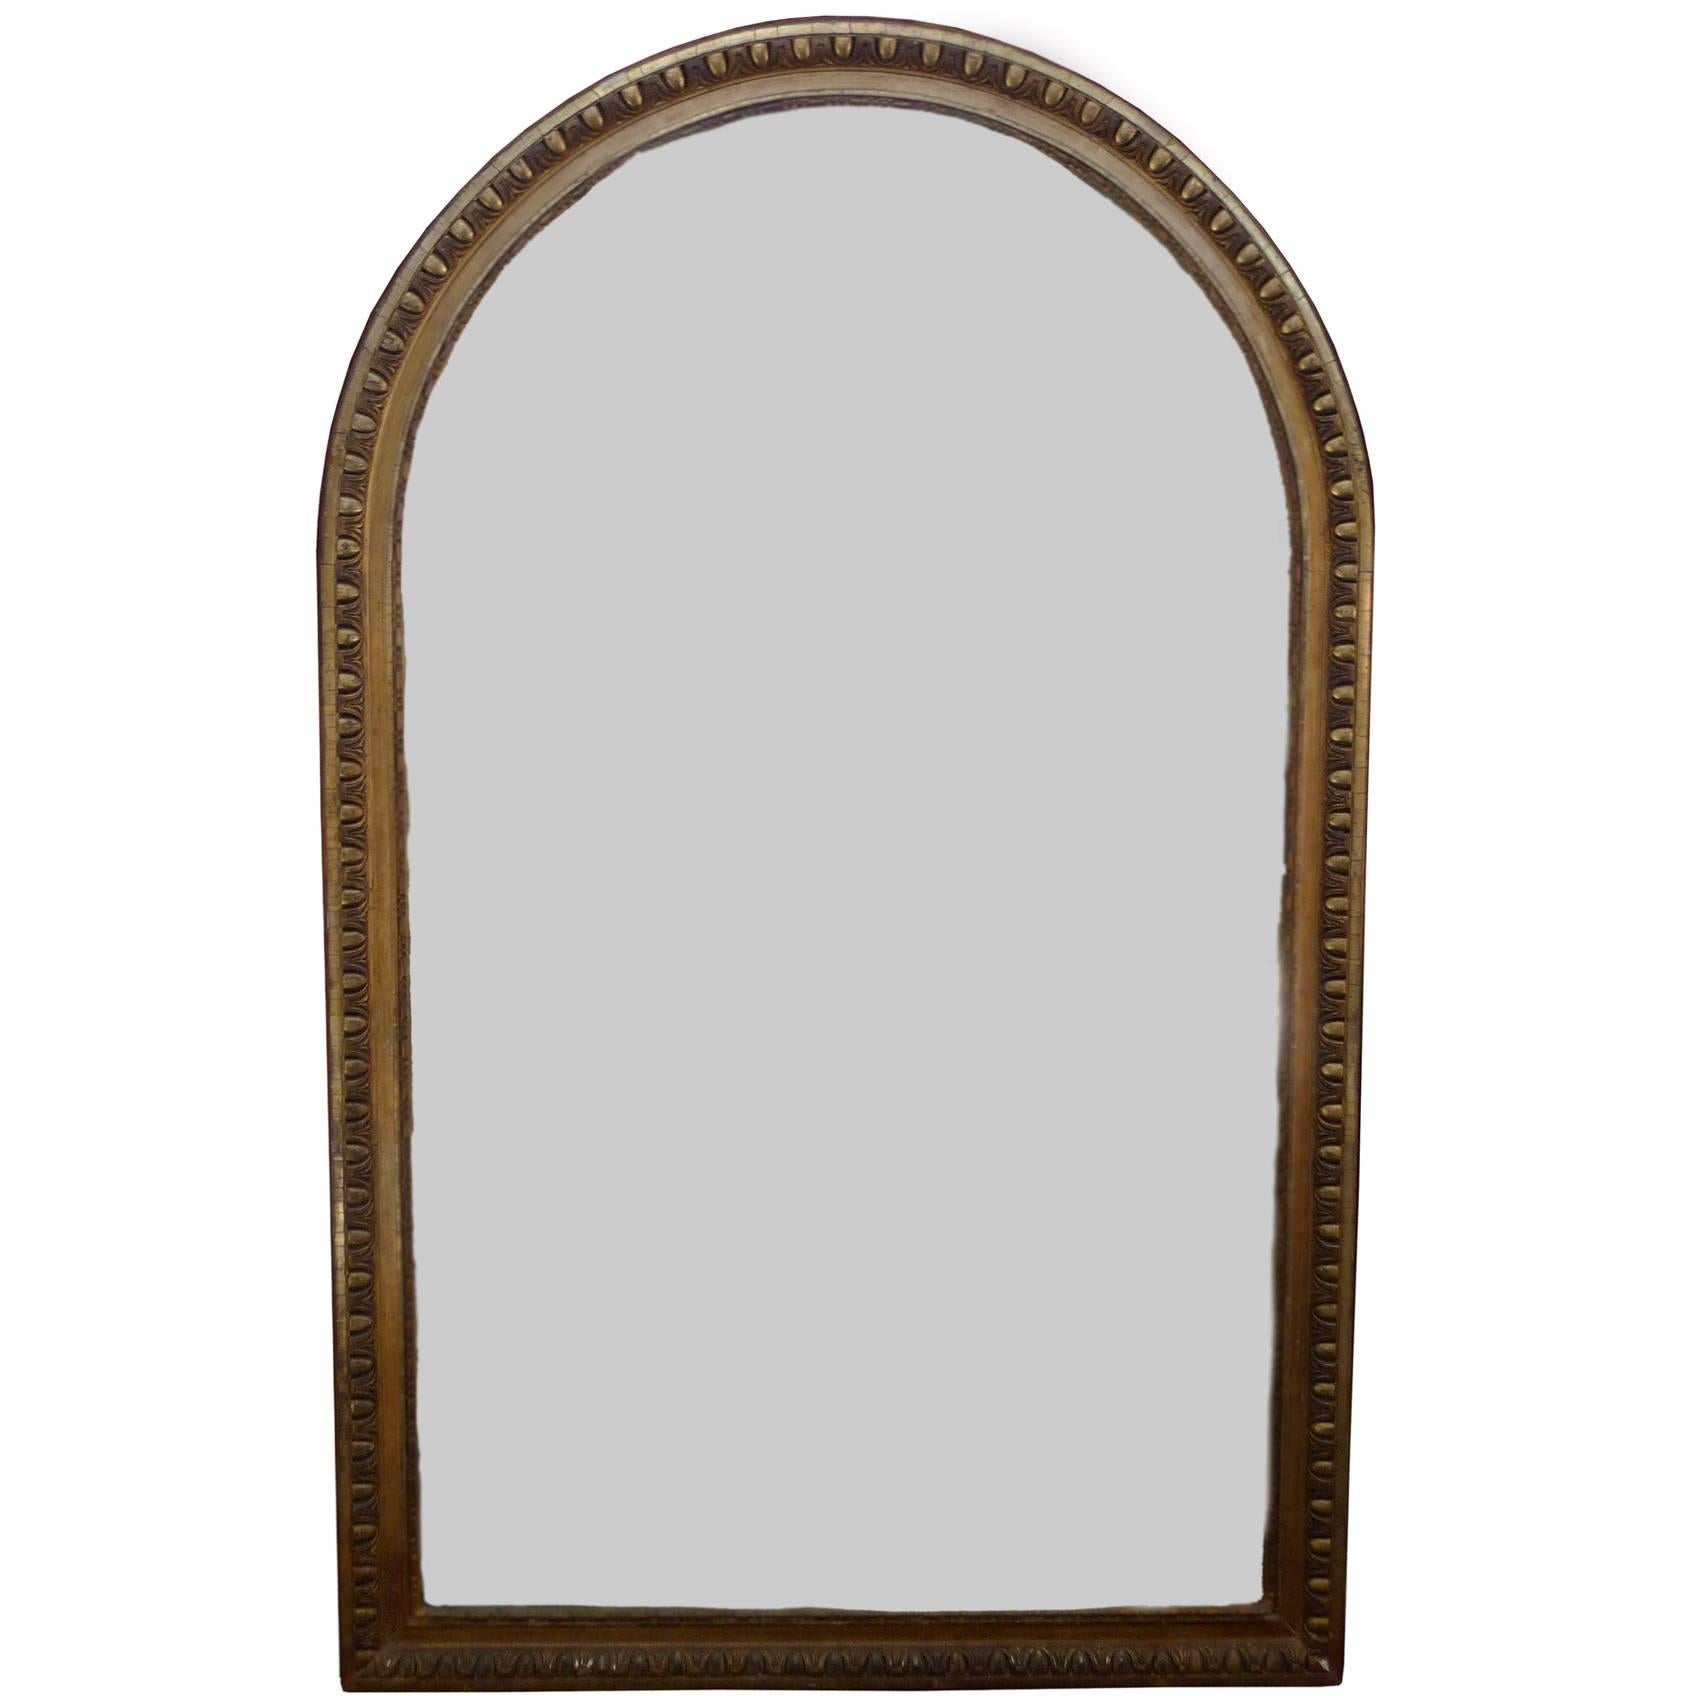 19th Century French Overmantle Mirror with Waterleaf Gilt Frame